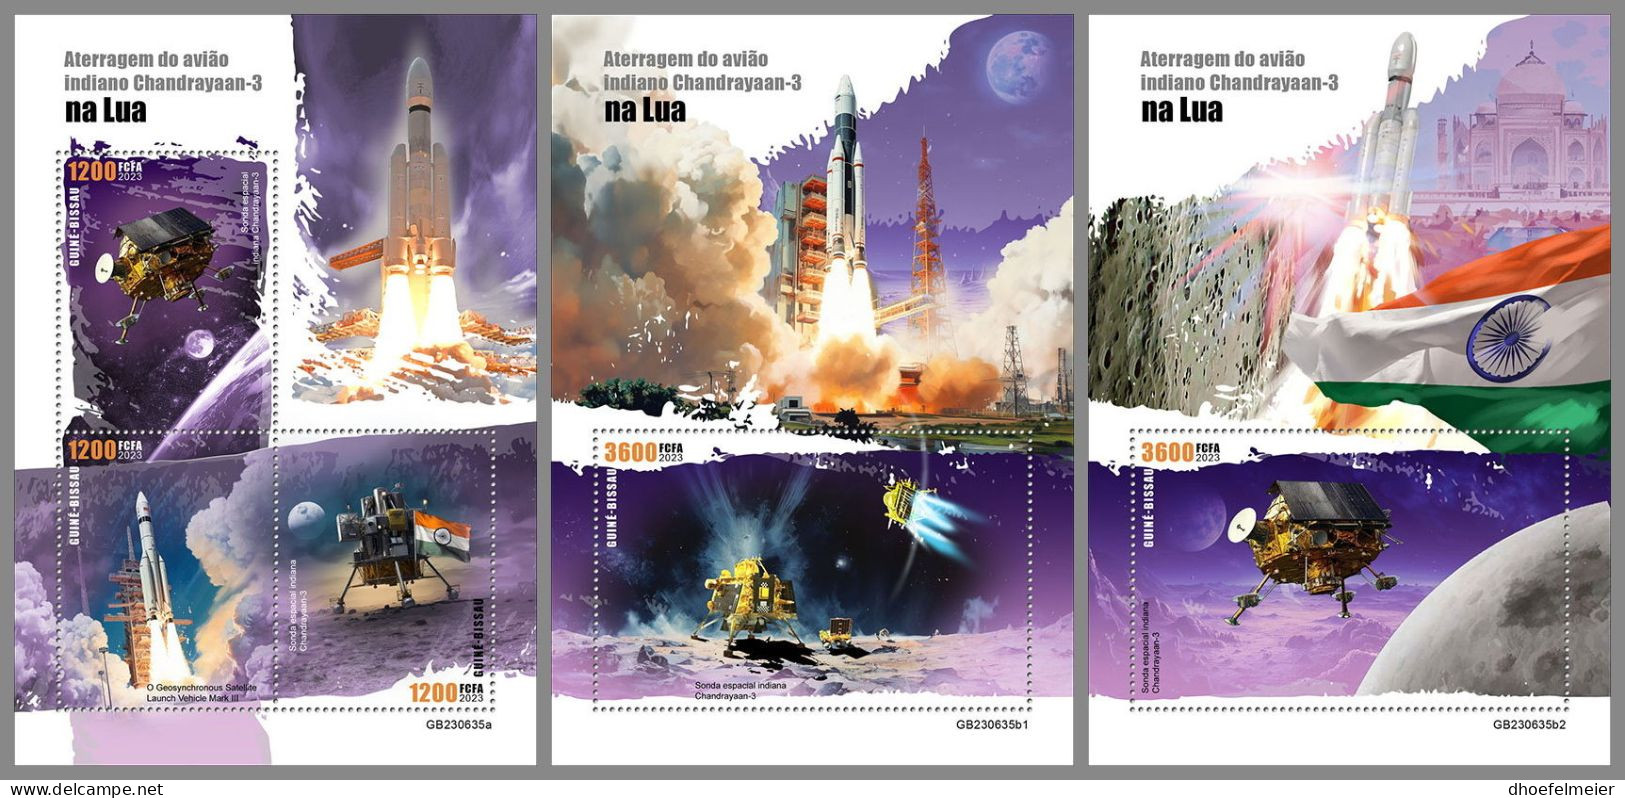 GUINEA-BISSAU 2023 MNH Indian Chandrayaan-3 Space Raumfahrt M/S+2S/S – IMPERFORATED – DHQ2420 - Africa